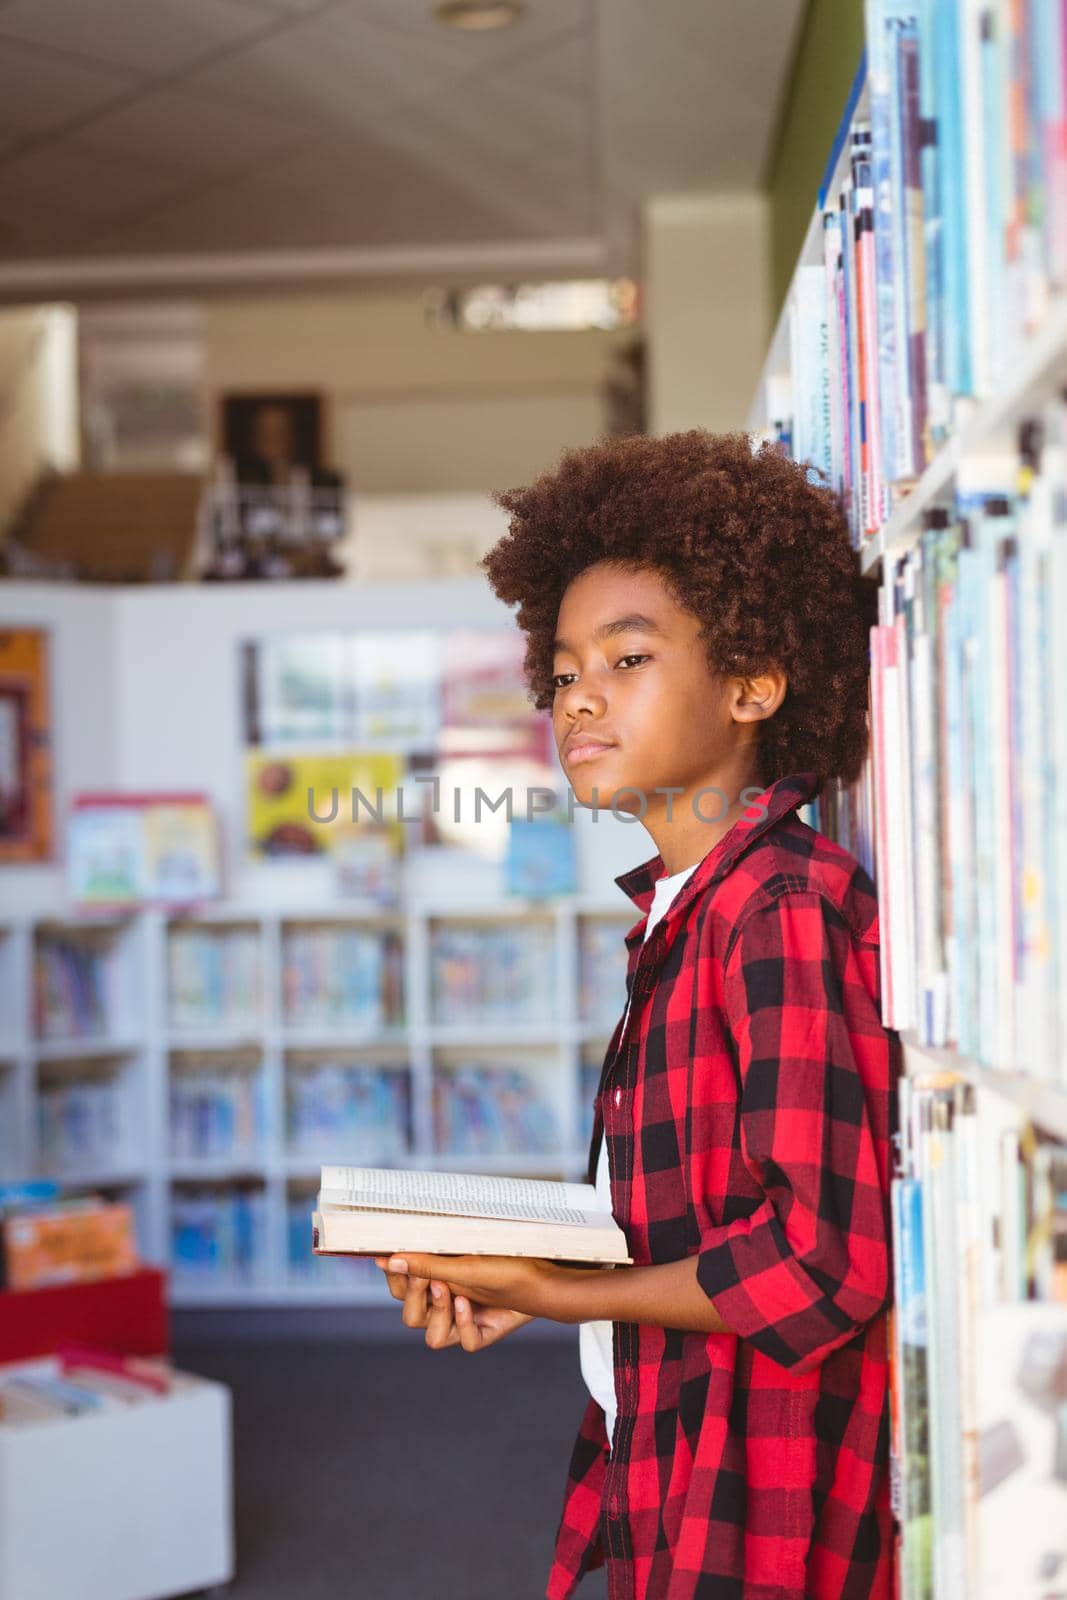 Happy african american schoolboy reading book standing in school library, looking away. childhood and education at elementary school.